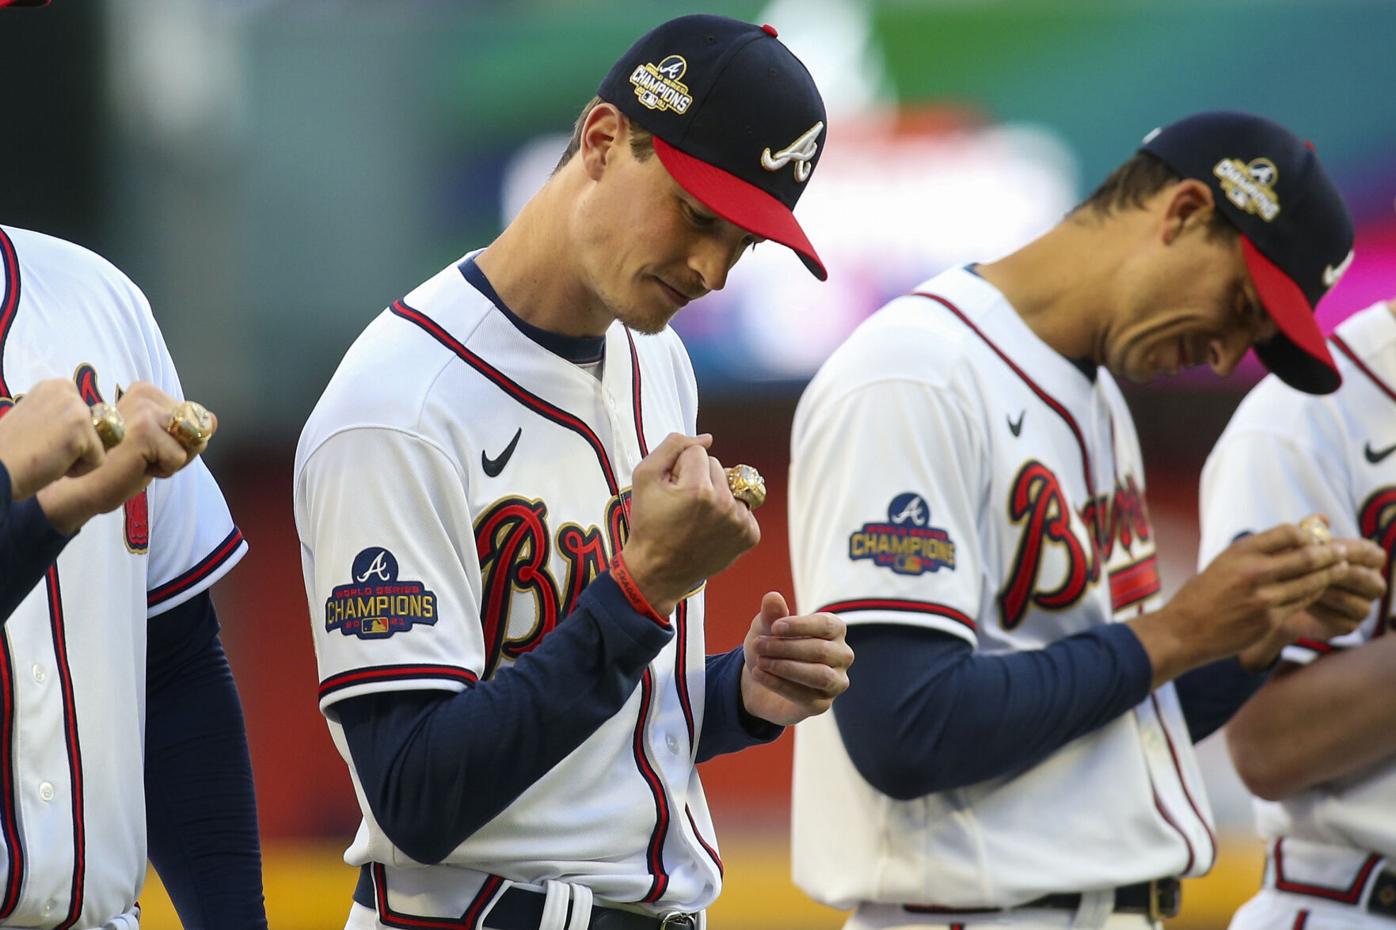 Did anyone else just get notified that their Albies gold program jersey was  canceled? : r/Braves